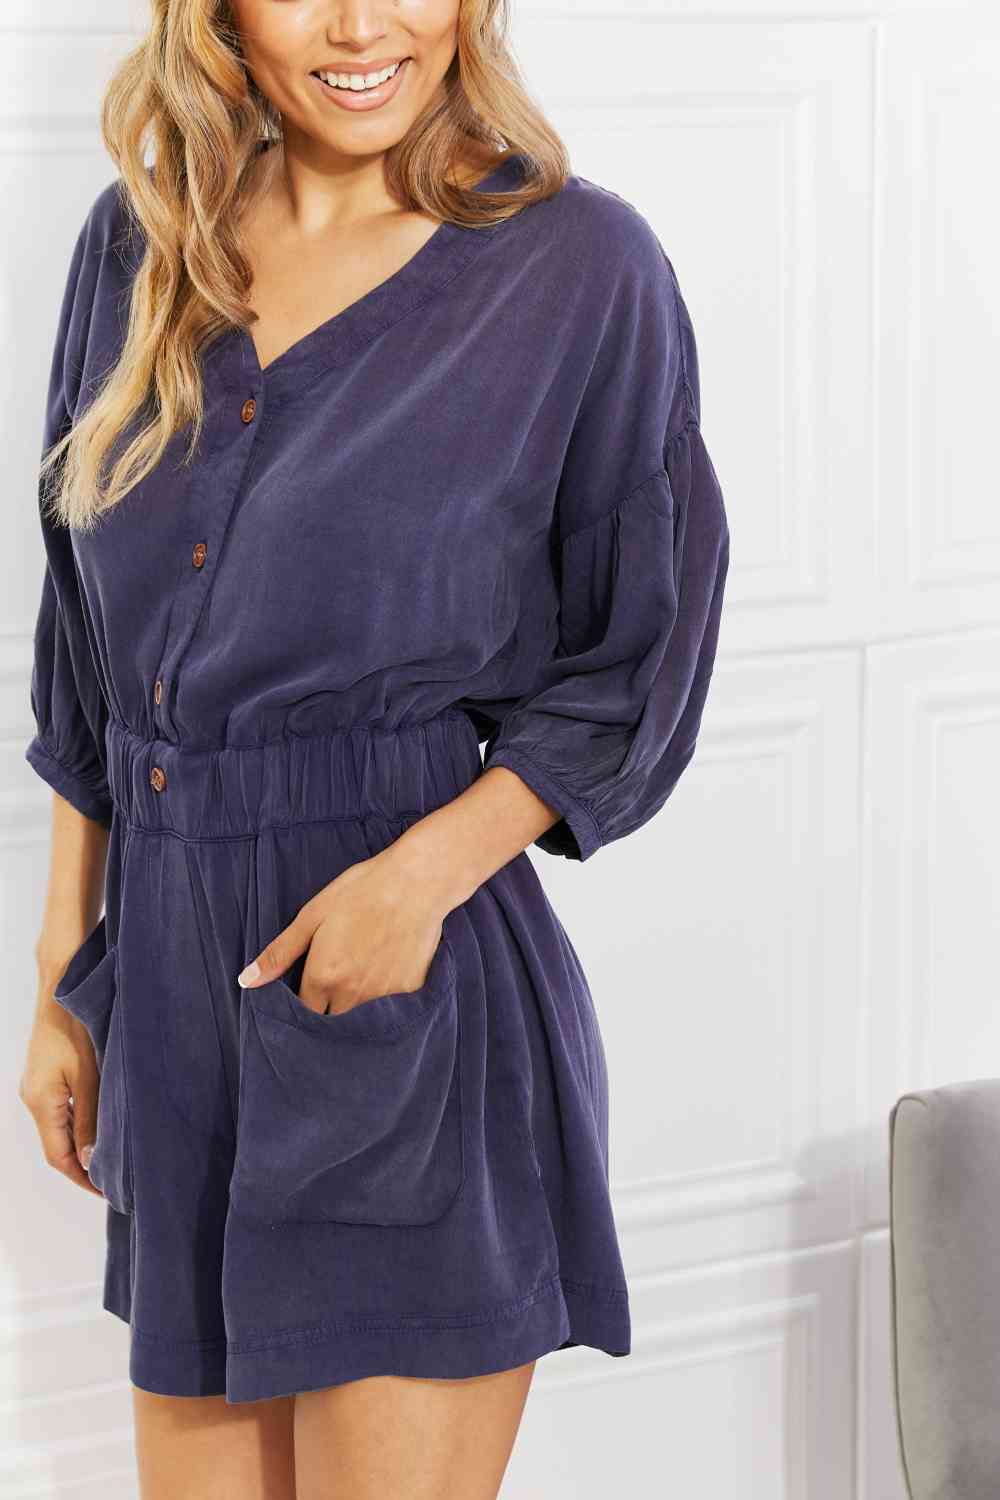 Full Size Play It Cool Three-Quarter Sleeve Romper in Blueberry - Women’s Clothing & Accessories - Jumpsuits &